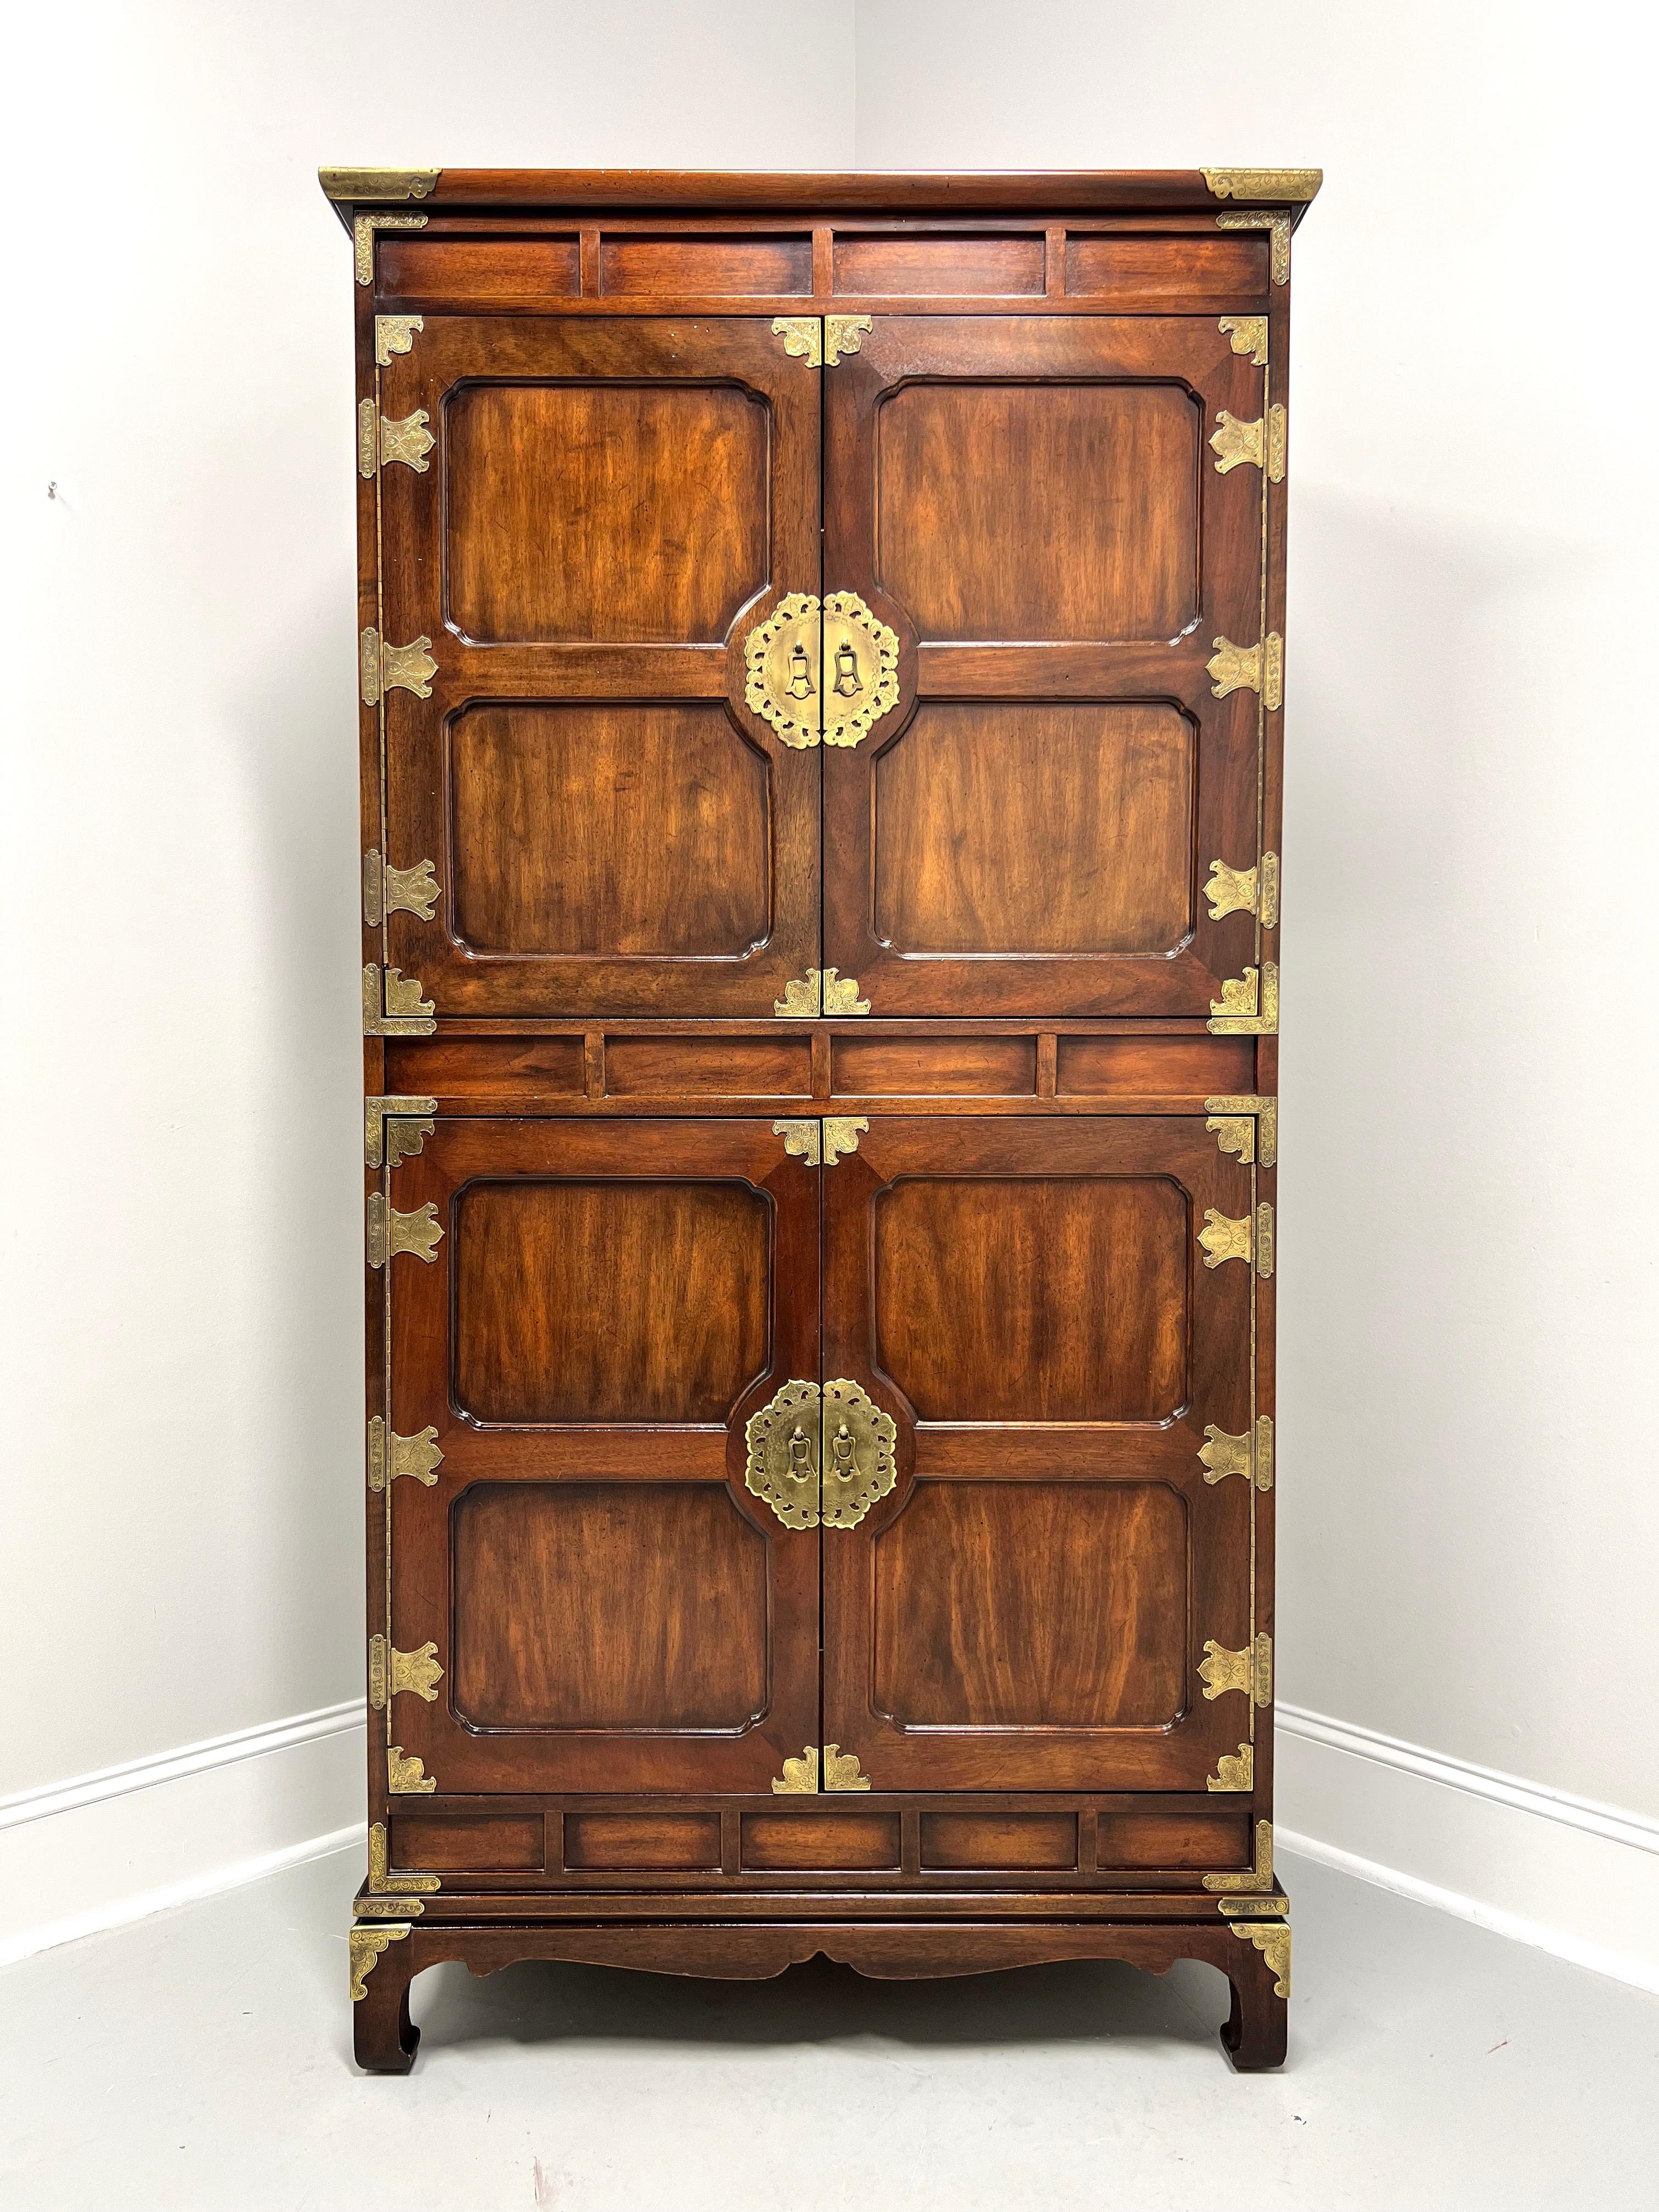 An extra tall gentleman's chest in the Japanese Tansu Campaign style by Henredon. Mahogany with brass hardware & accents, overhanging top, decorative upper, center & lower panels, carved apron, and turned inward feet. Upper cabinet features two